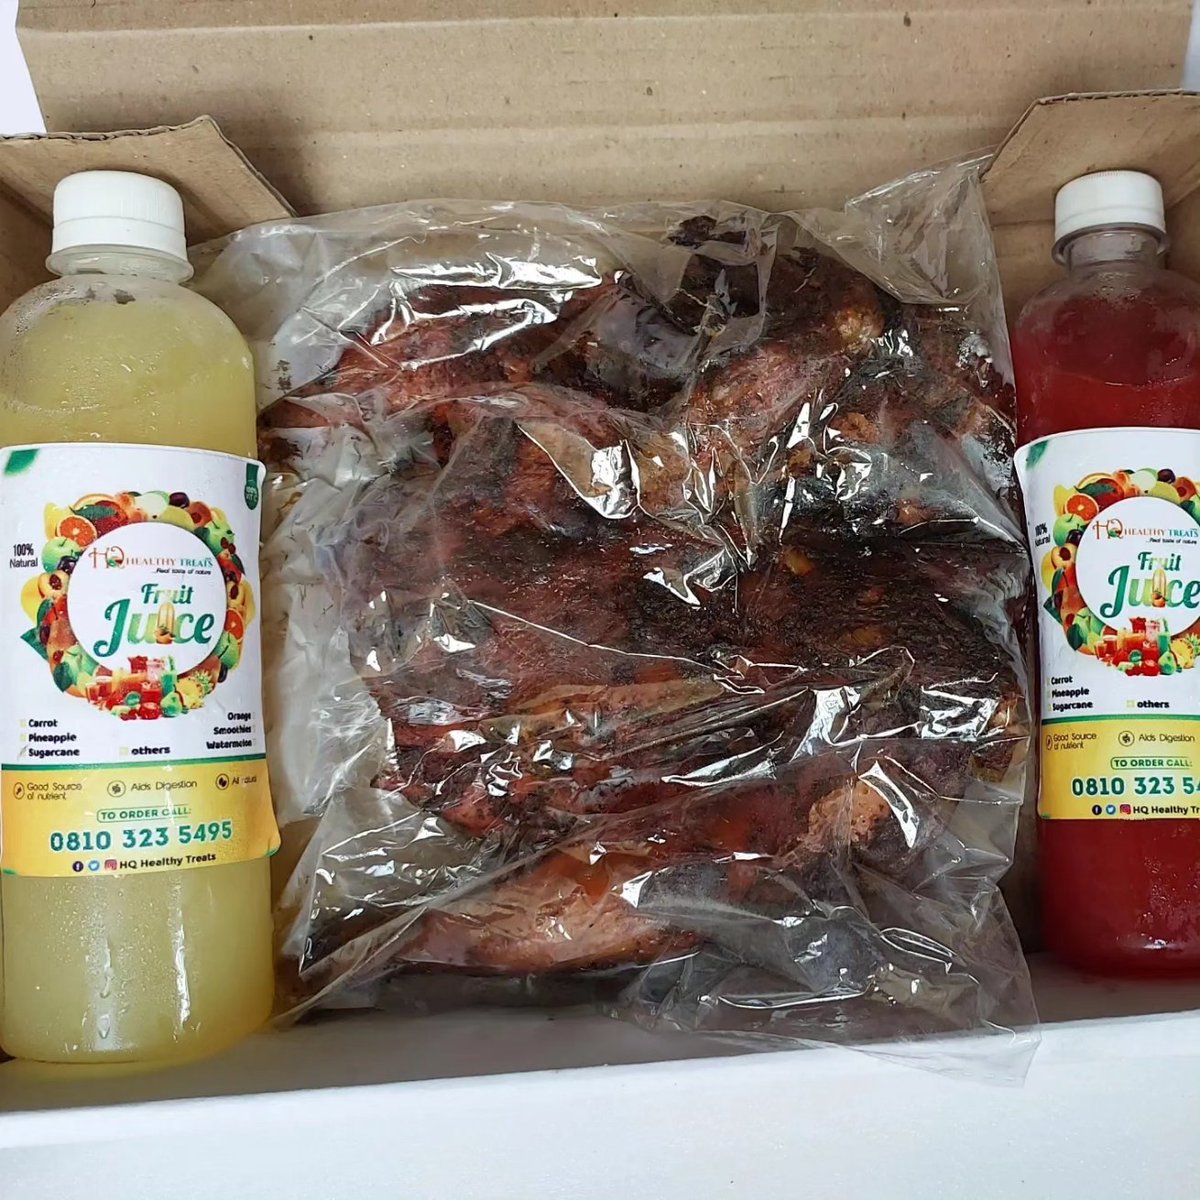 @peng_writer Yes ooo

Comman enjoy life with @HqTreats fruit juices and spicy grilled guinea fowl😋😋

#fruitjuicesinlagos 
#guineafowlinlagos
#fruitgiftinlagos